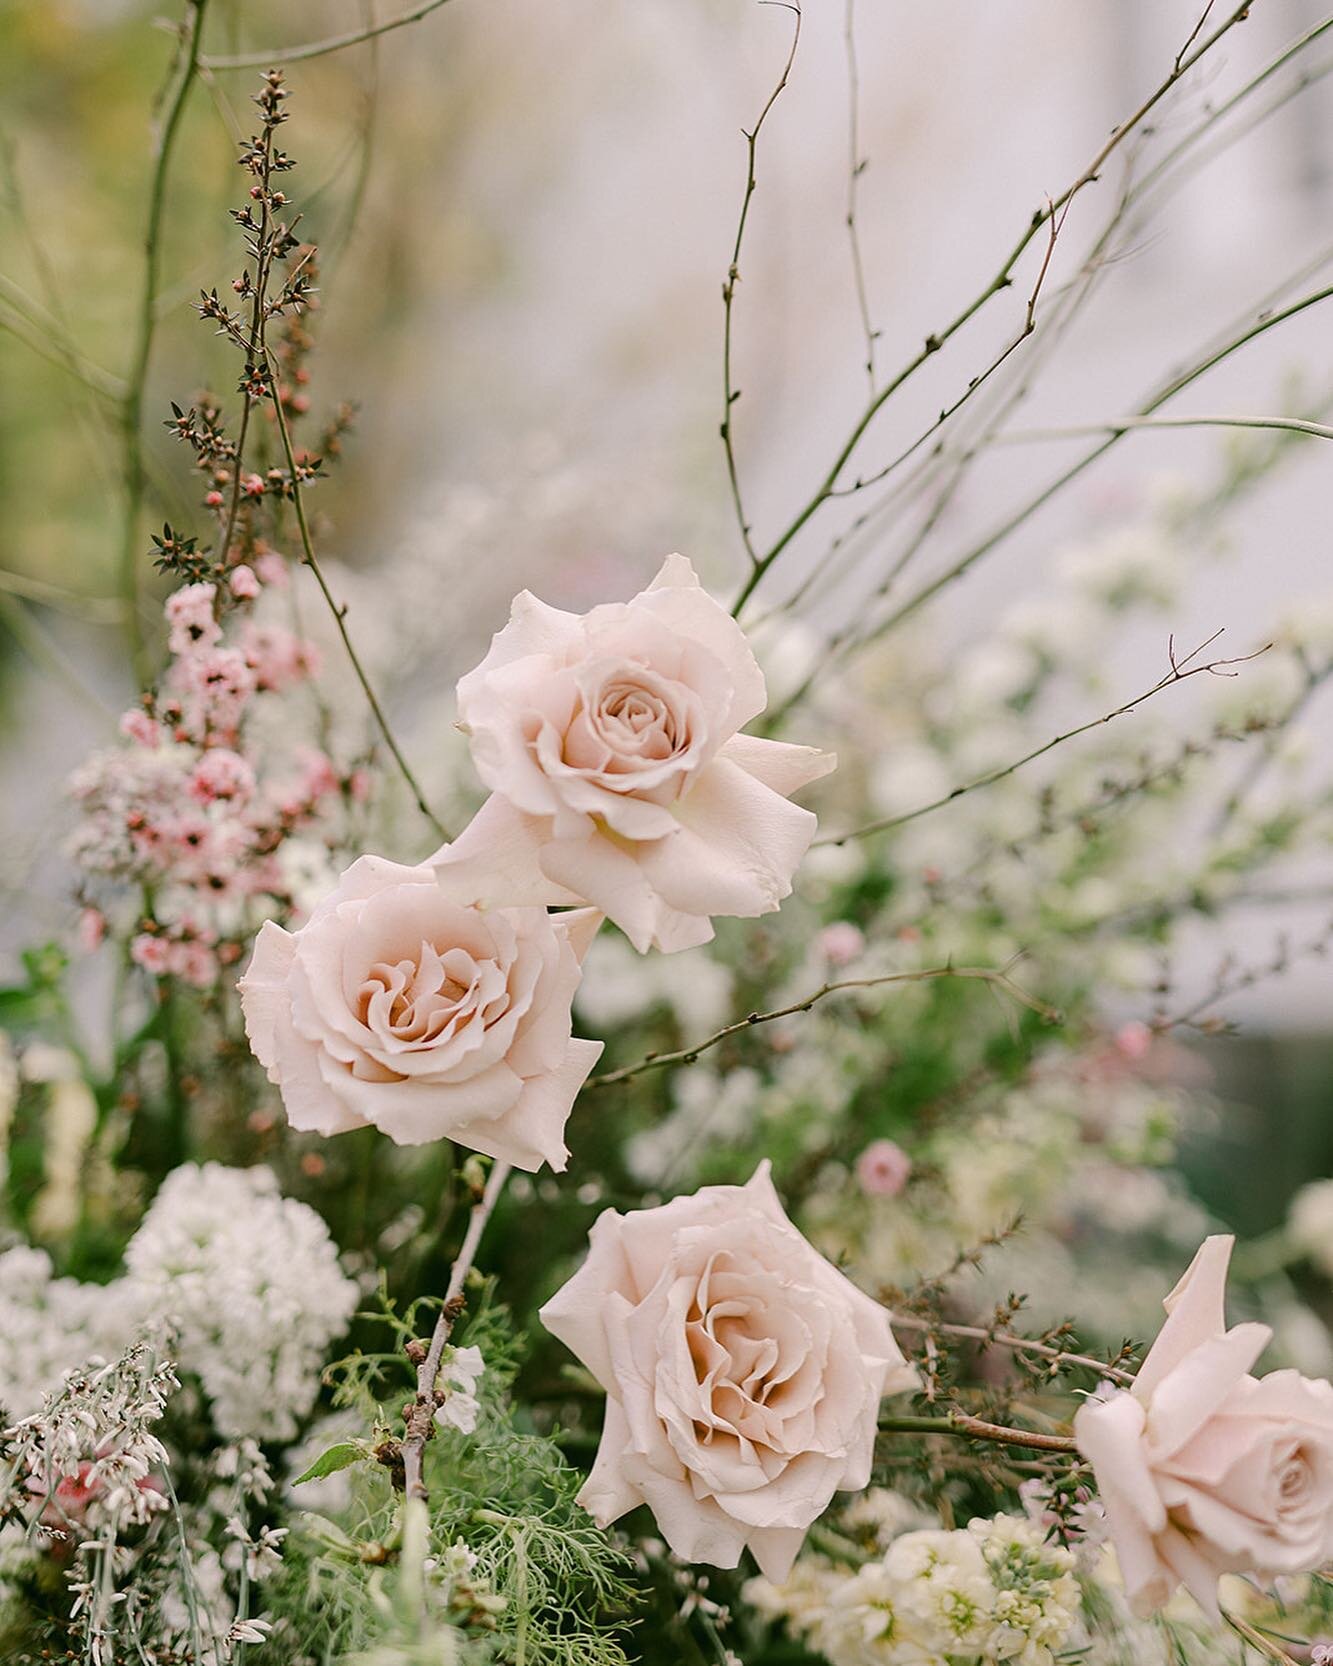 Working on design decks and getting excited for the remaining 2022 season. Eager to see each custom design and detail unfold✨

A favorite floral moment &amp; palette from J&amp;S&rsquo;s wedding this past spring. @kellybrownweddings